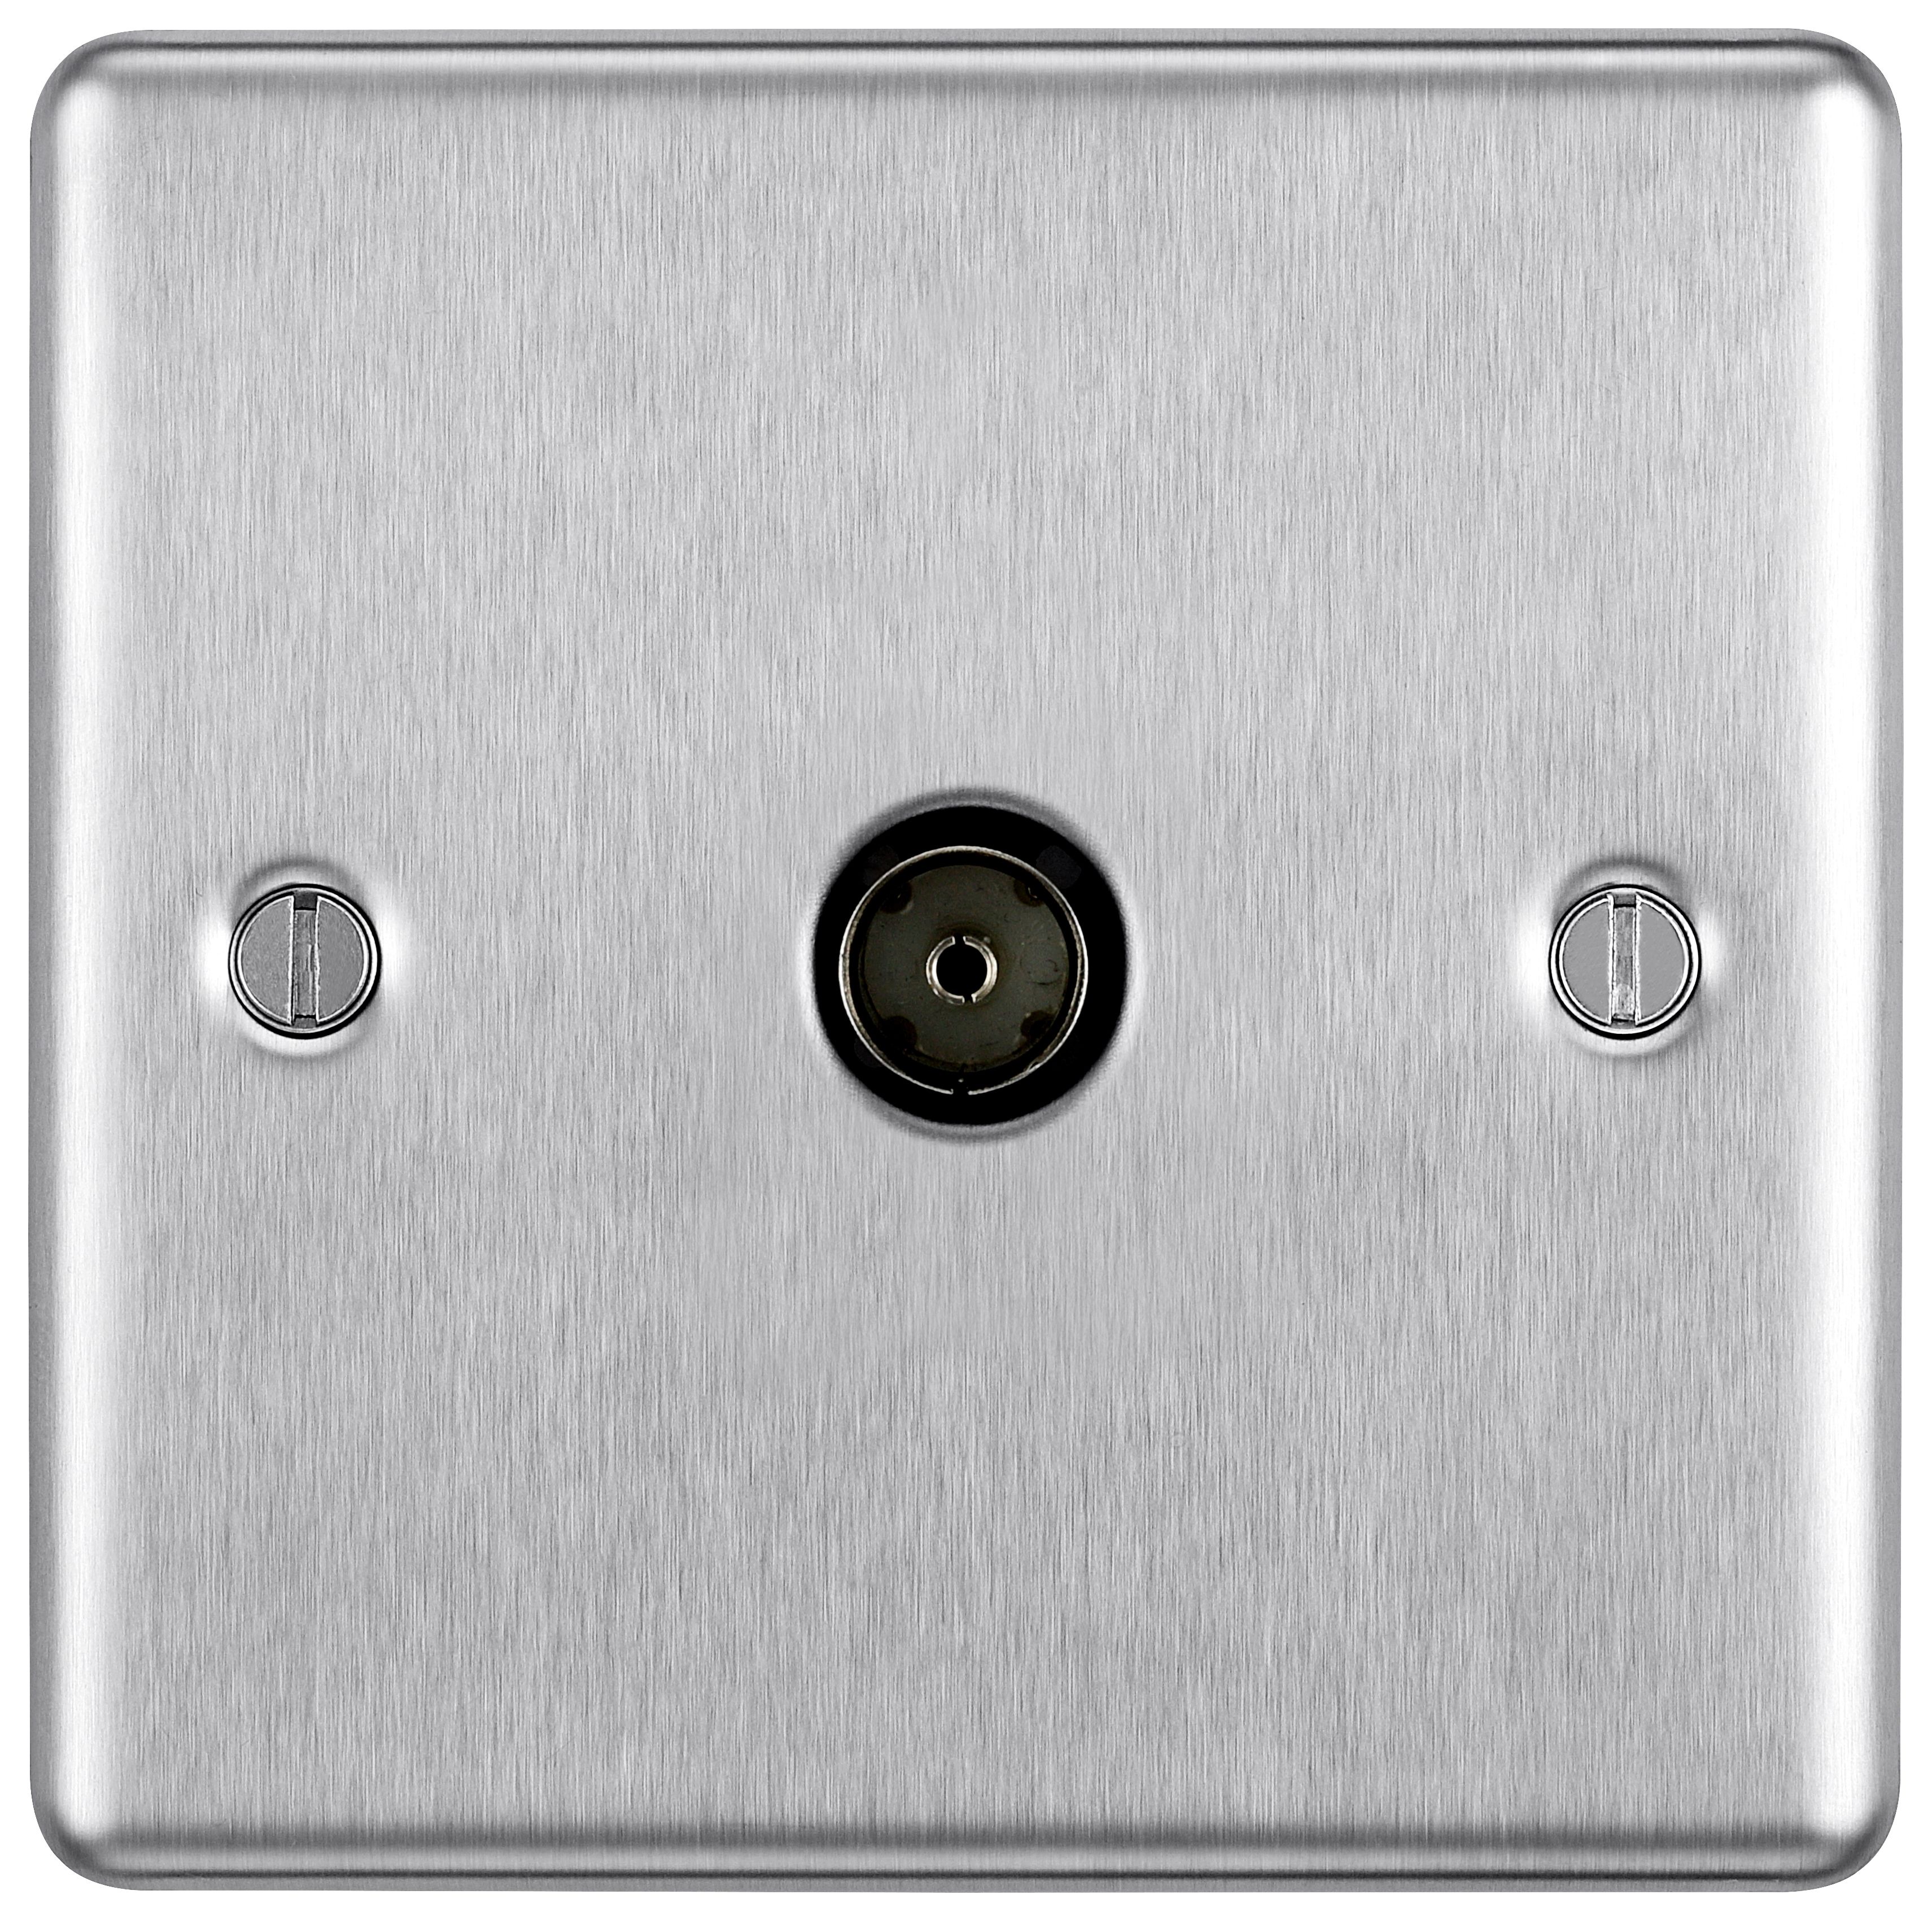 Image of BG Screwed Raised Plate Single Socket For Tv Or Fm Co-Axial Aerial Connection - Brushed Steel